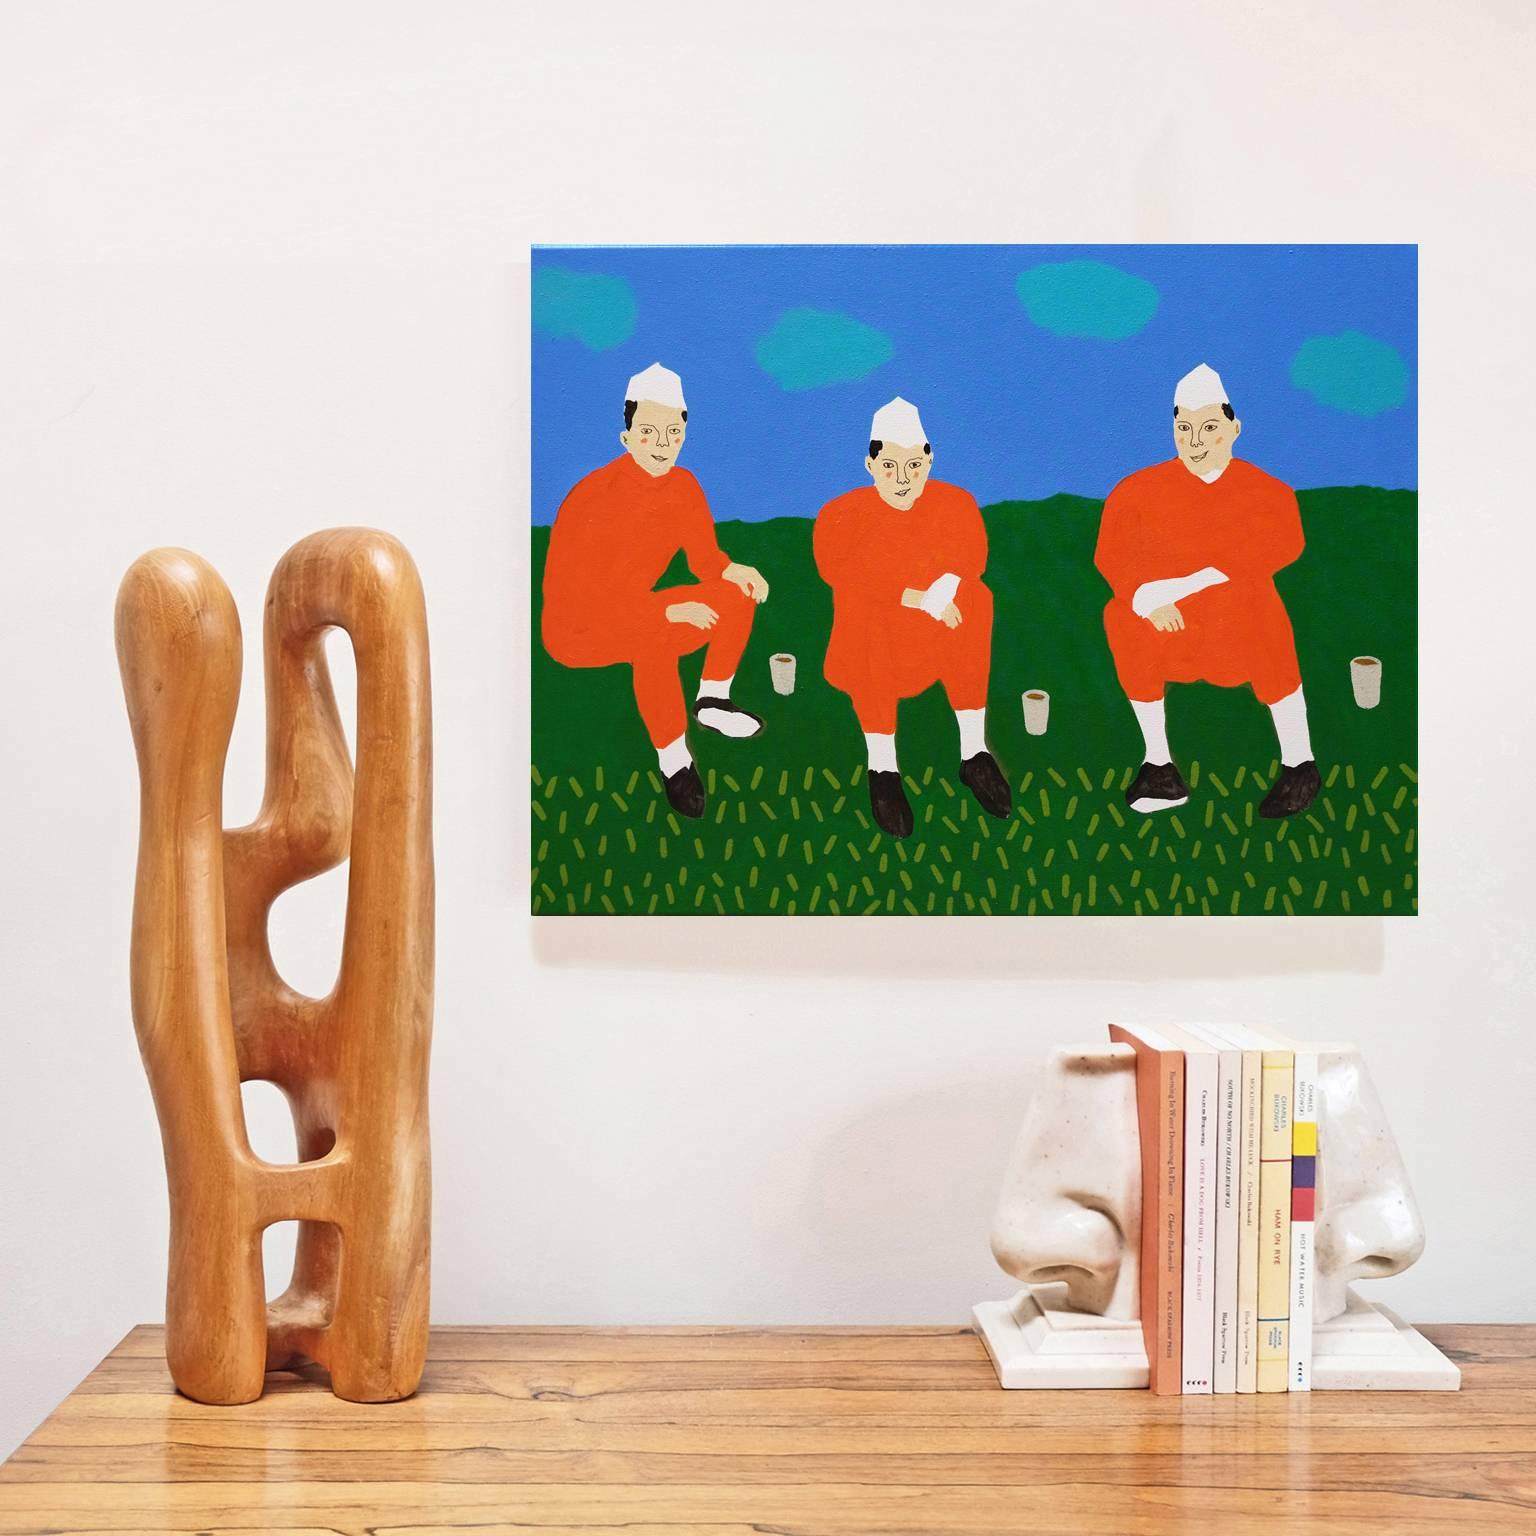 Acrylic on canvas by Alan Fears, 2018. 

Alan Fears (b. 1974) is an emerging British artist who was shortlisted for the John Moores painting prize, 2018, and is featured on the cover of the 229 Summer issue of The Paris Review.

'A naive artist,